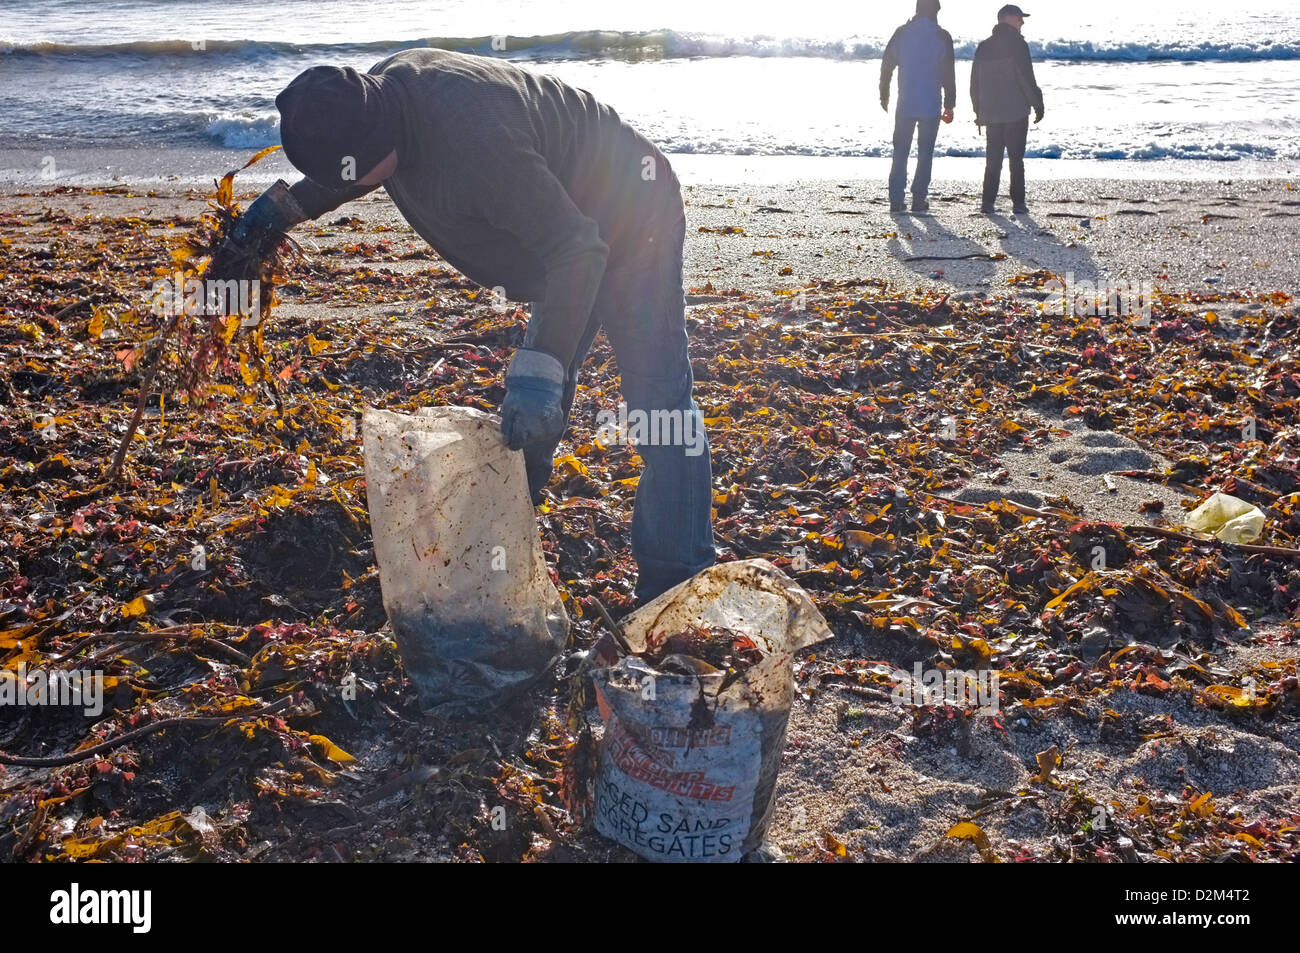 A man collects seaweed from a beach in Cornwall, UK Stock Photo